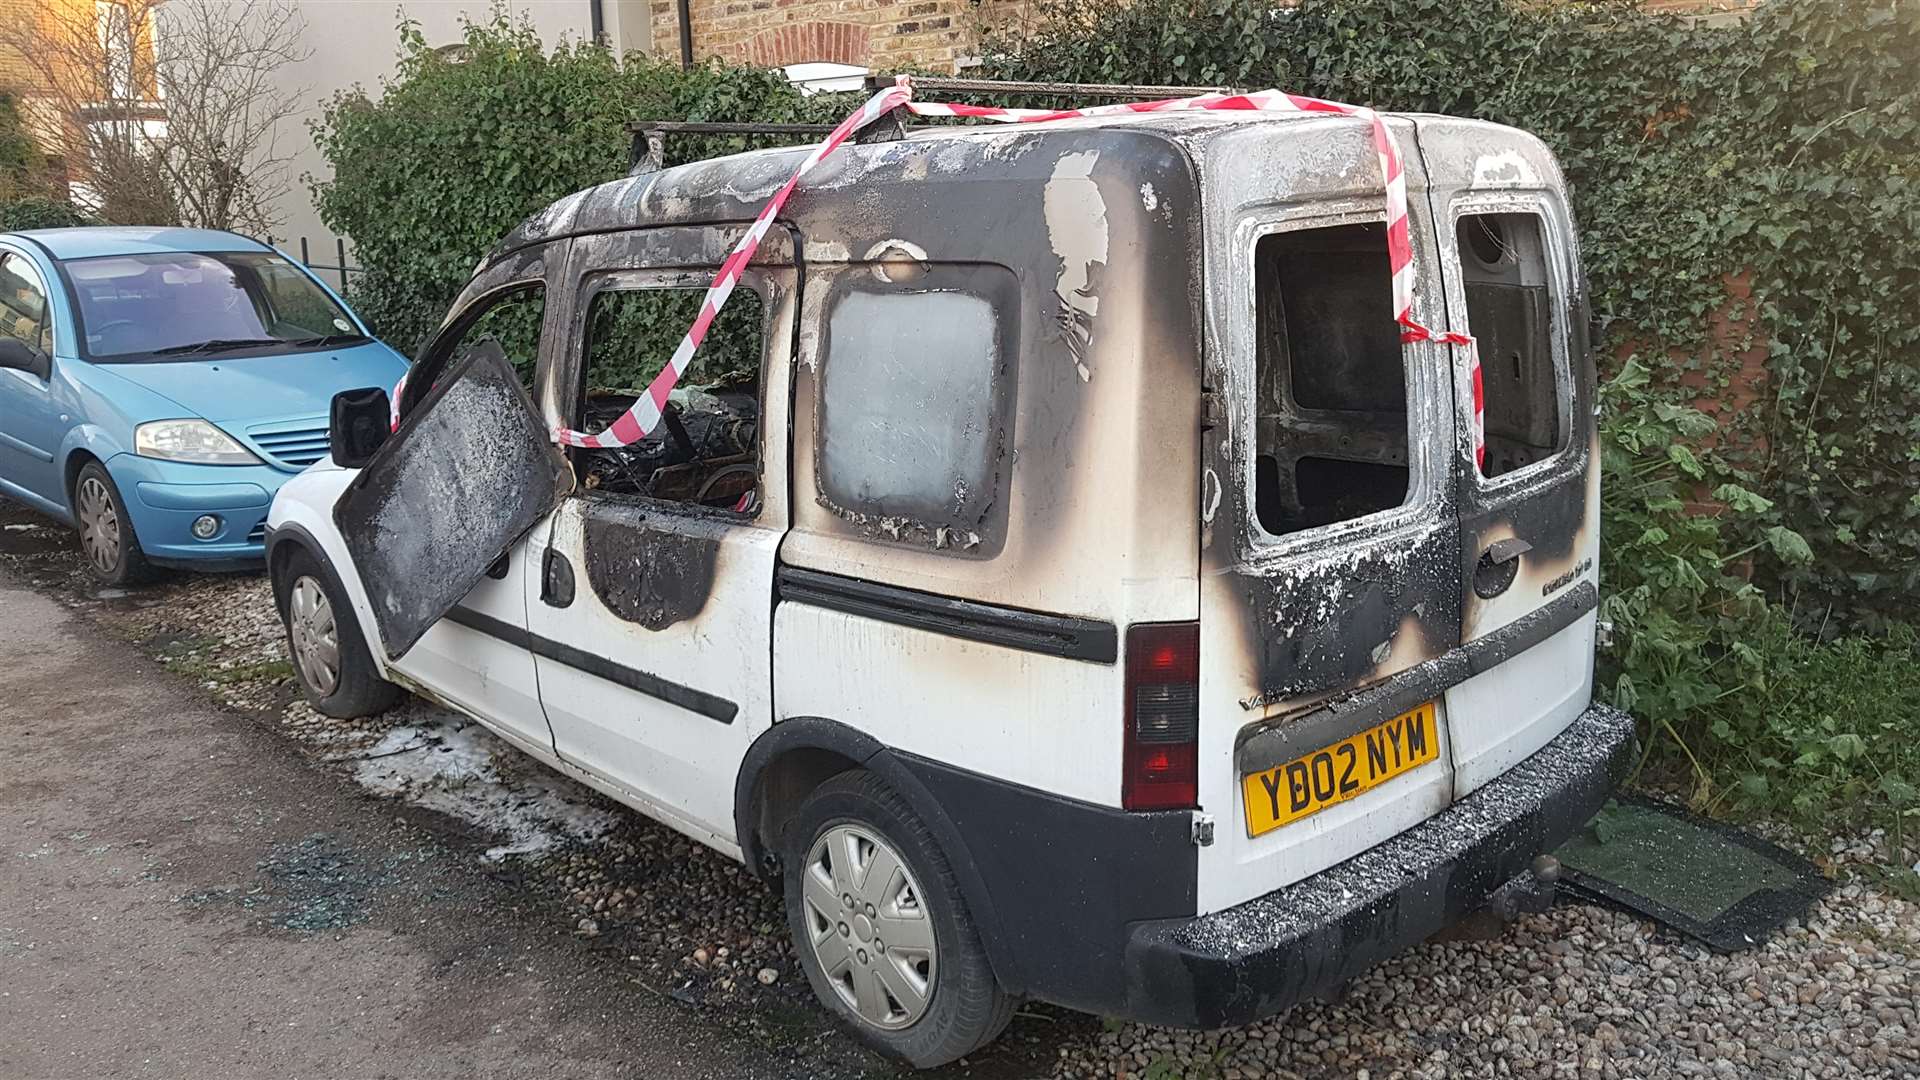 The fire-damaged van in Collingwood Road (6318034)